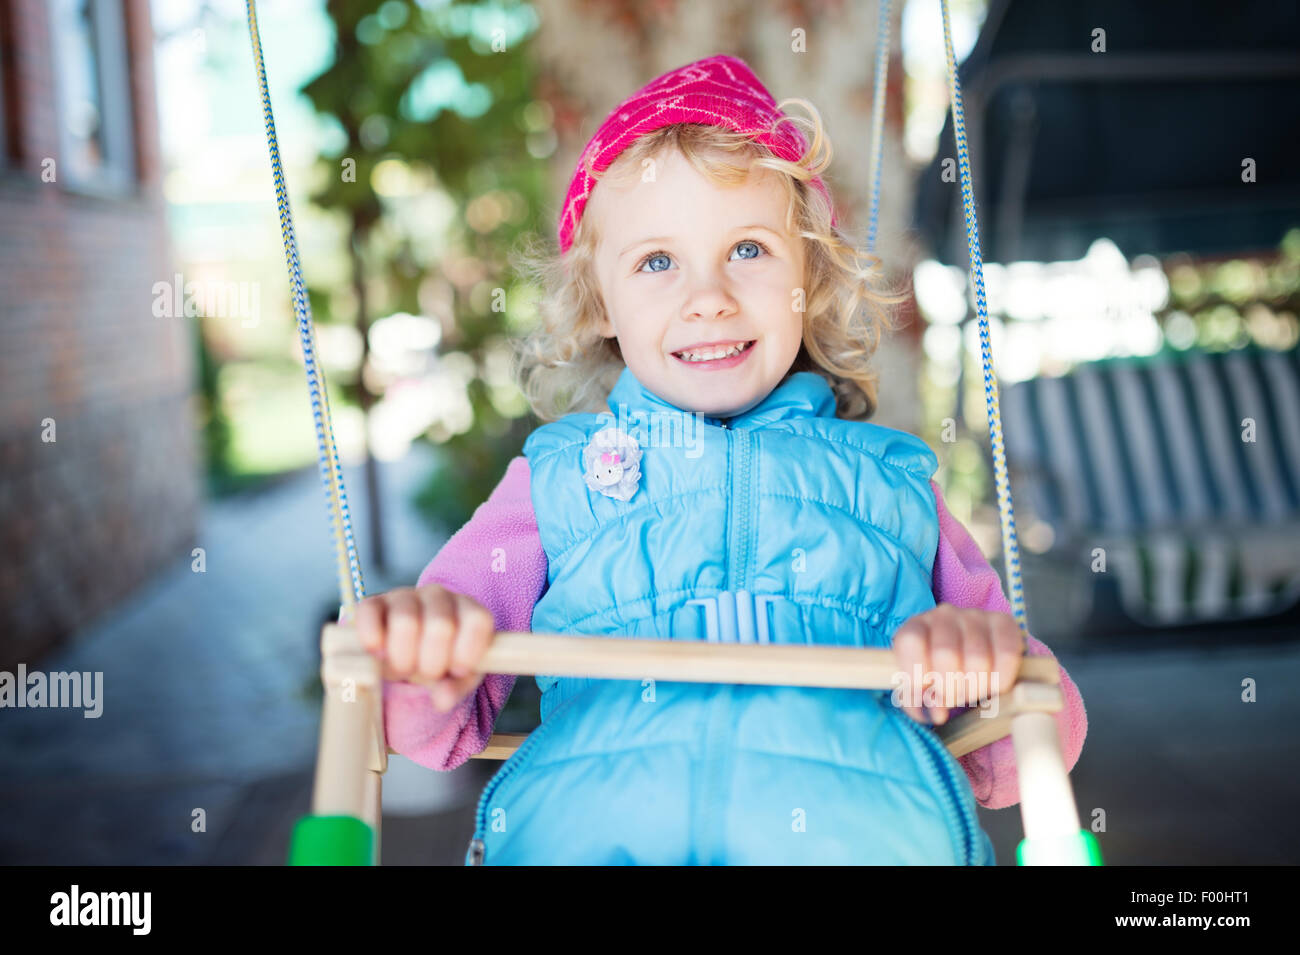 Laughing little girl on swing Stock Photo